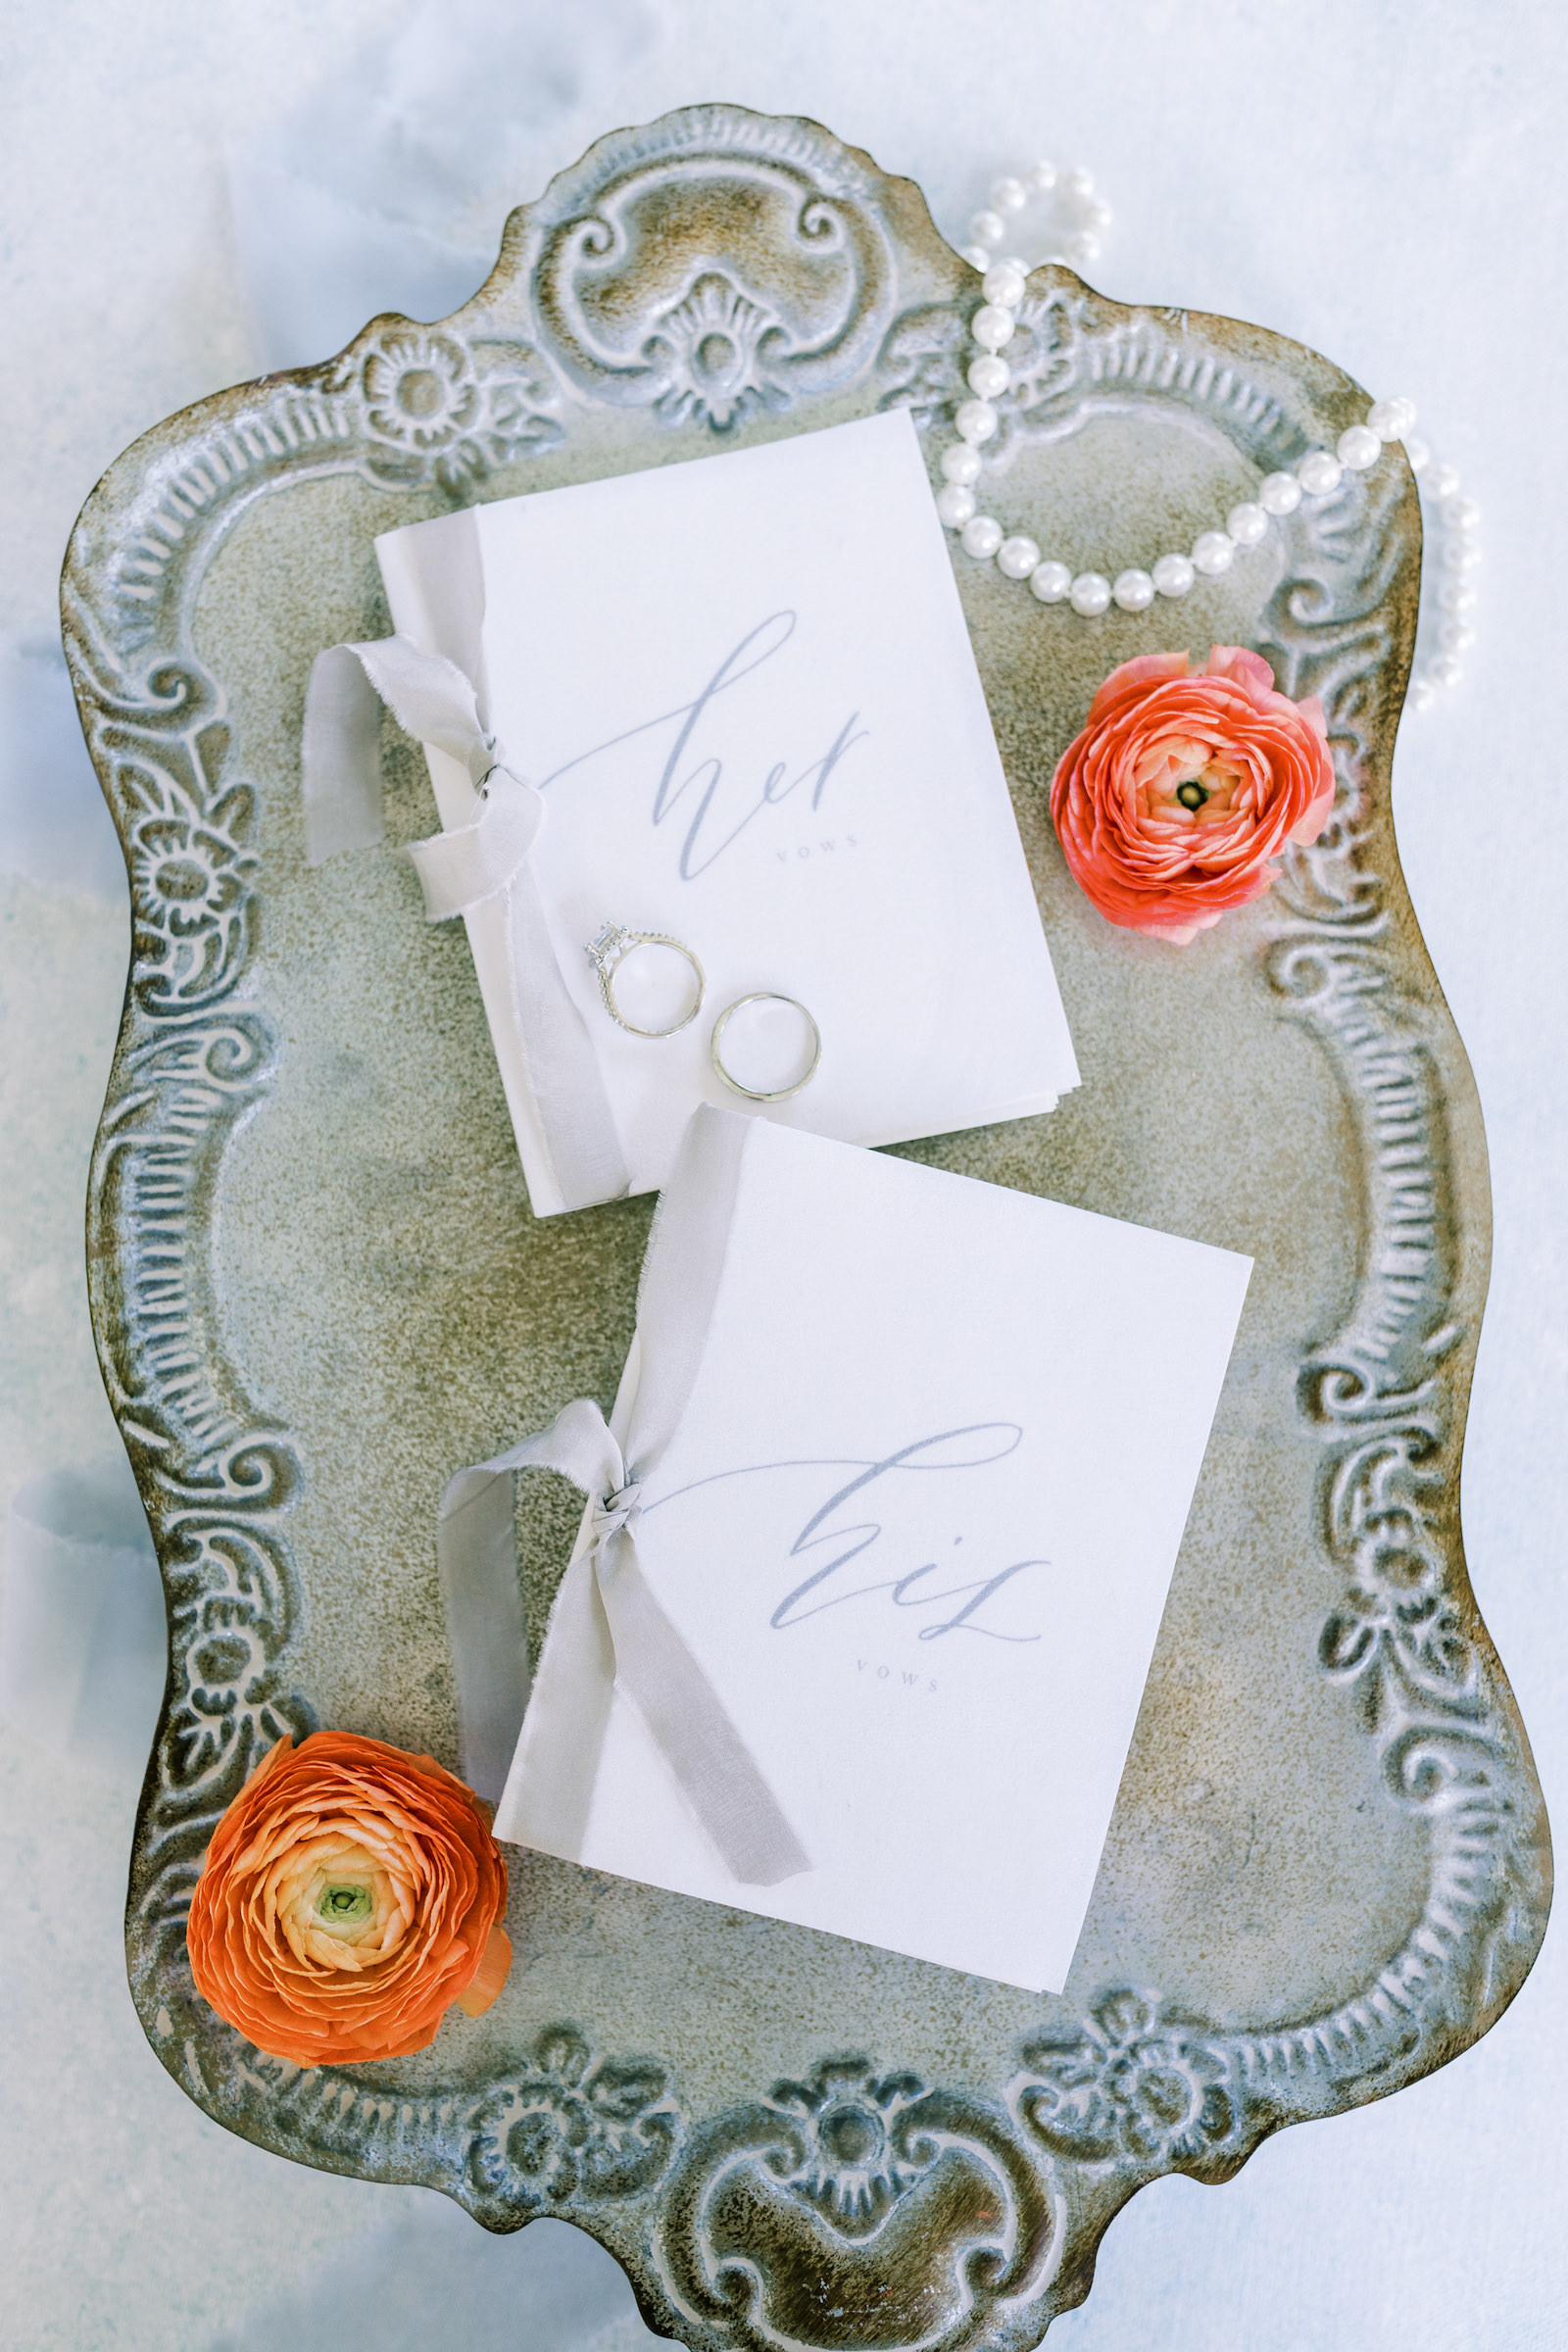 Vintage Inspired Florida Wedding Details, His and Her Vow Books with Light Blue Script | Tampa Bay Luxury Wedding Planner EventFull Weddings